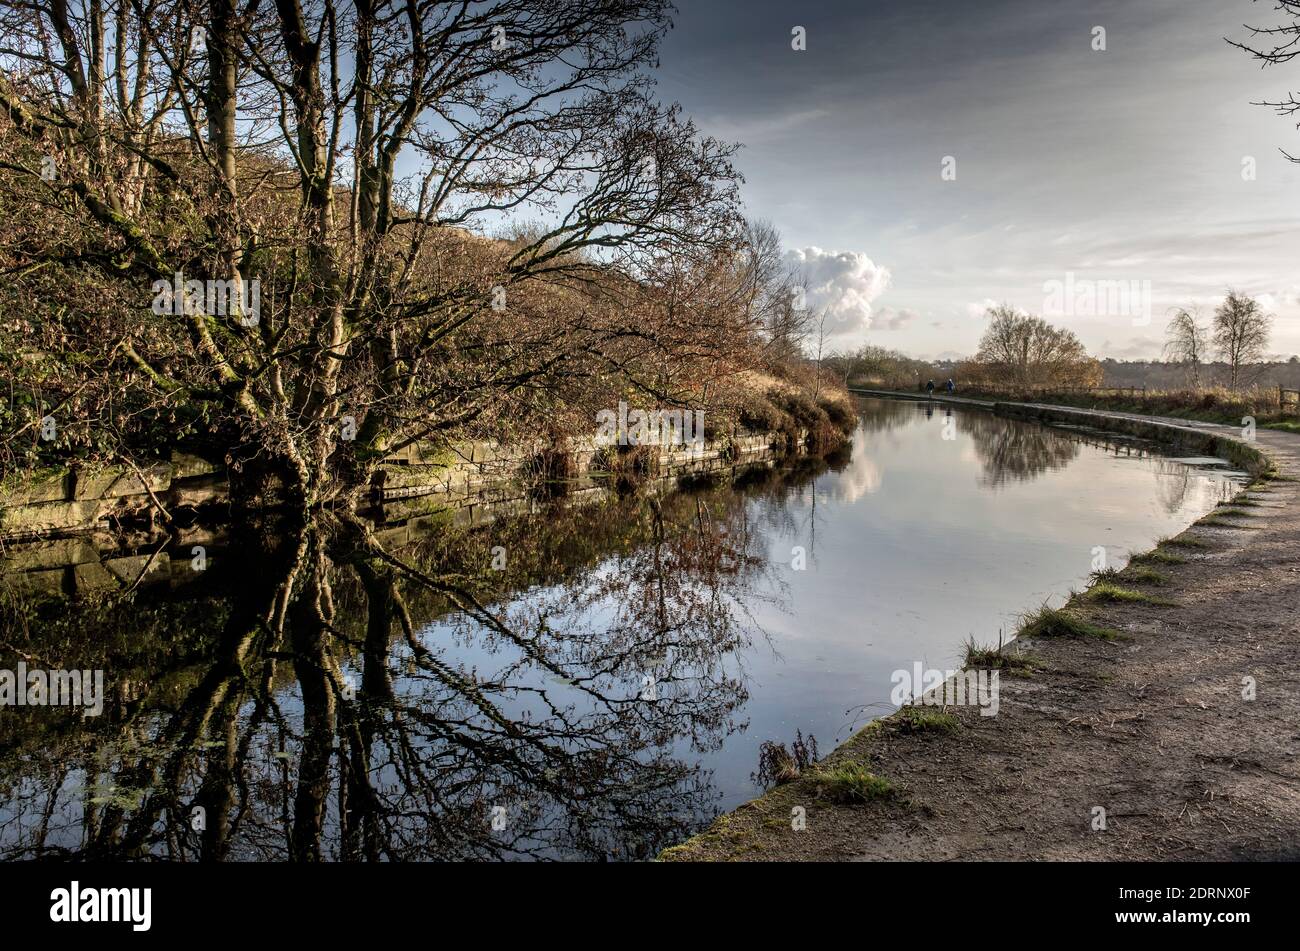 Manchester, Bolton and Bury Canal in Little Lever, Bolton. Walkers take advantage of a glorious winter day to take in the scenery along the disused ca Stock Photo